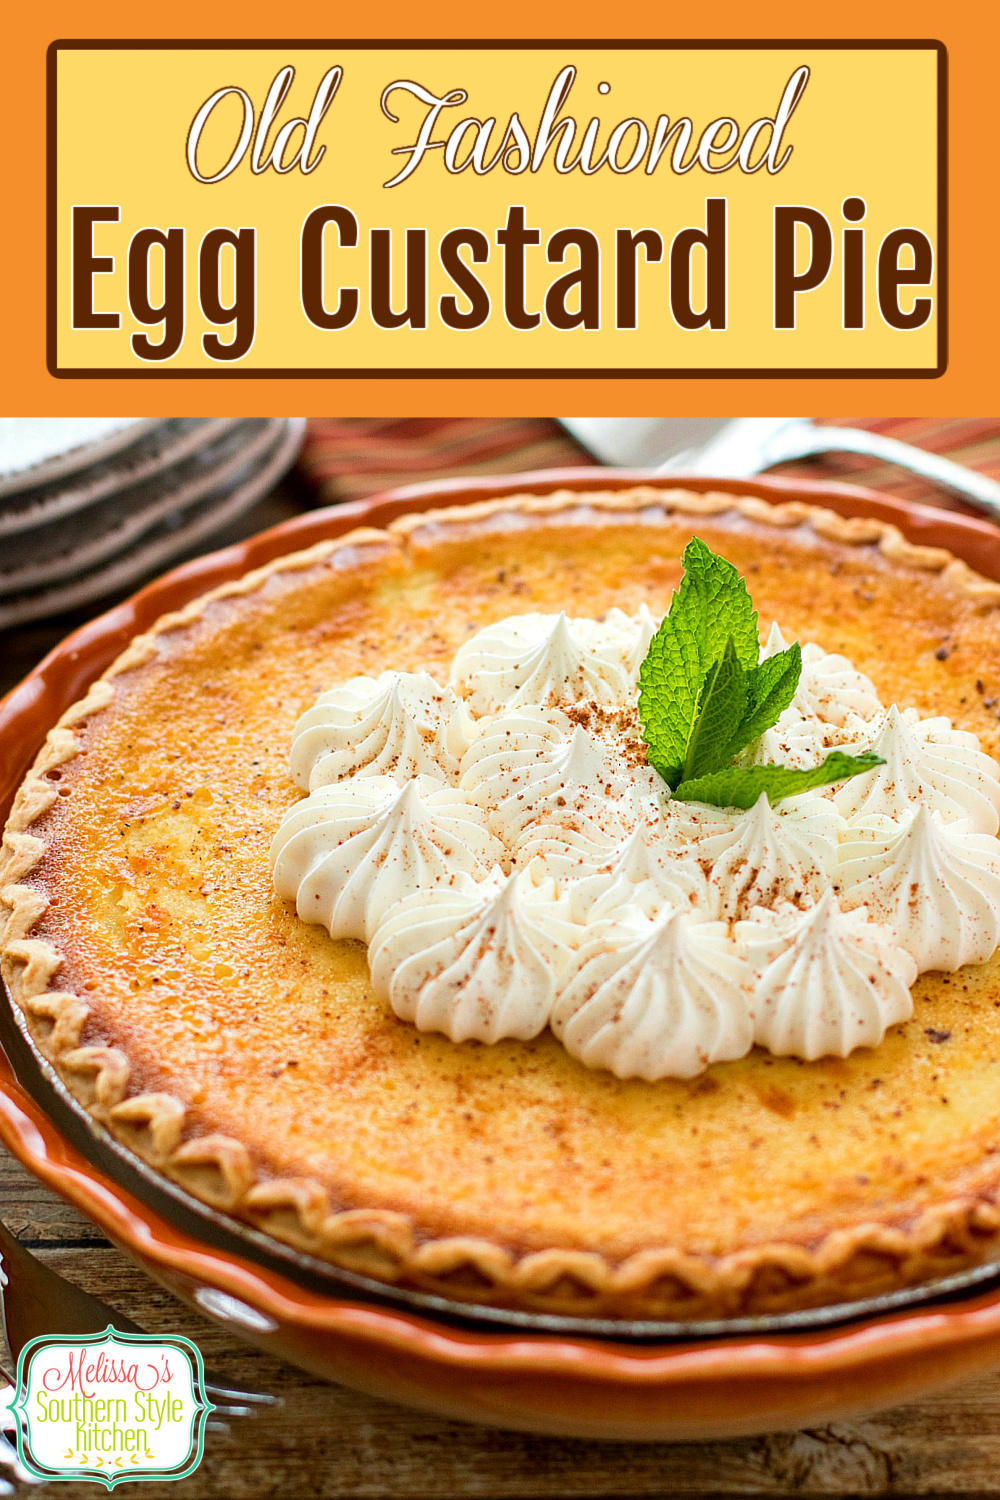 This Egg Custard Pie features a sweet vanilla egg custard filling that's like a creamy bite of old fashioned nostalgia #custardpie #eggcustardpie #pierecipes #creampierecipes #besteggcustardpie #desserts #pies #southernpierecipes via @melissasssk